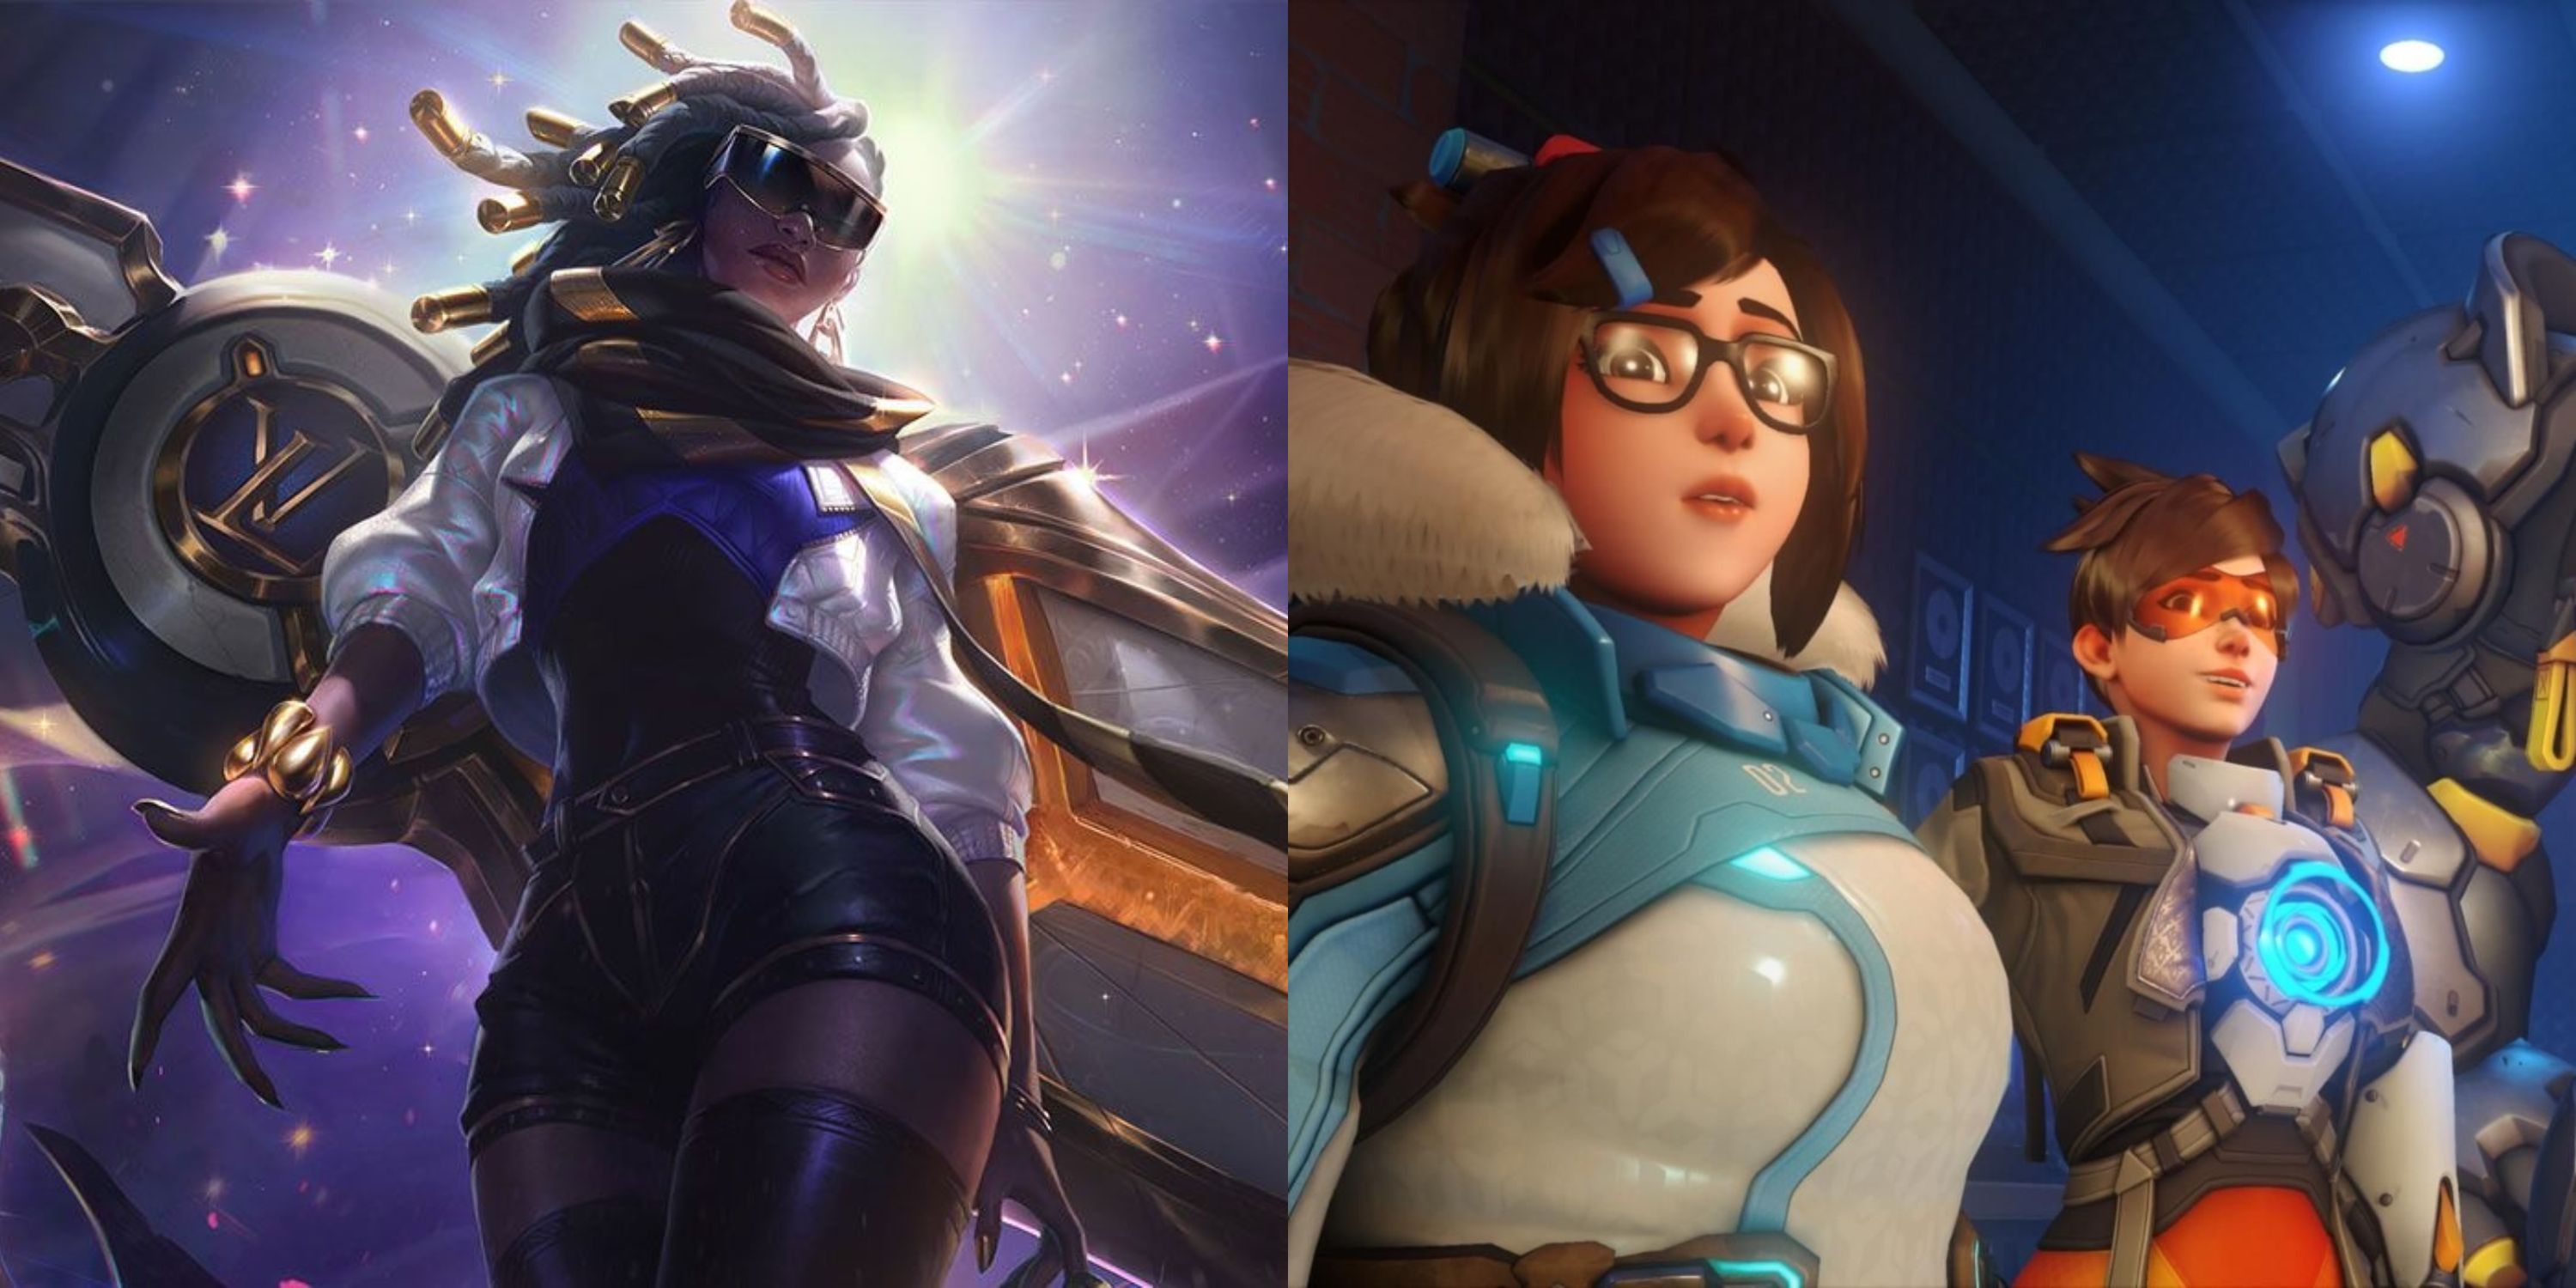 Featured image split Senna skin in League of Legends and two characters in Overwatch